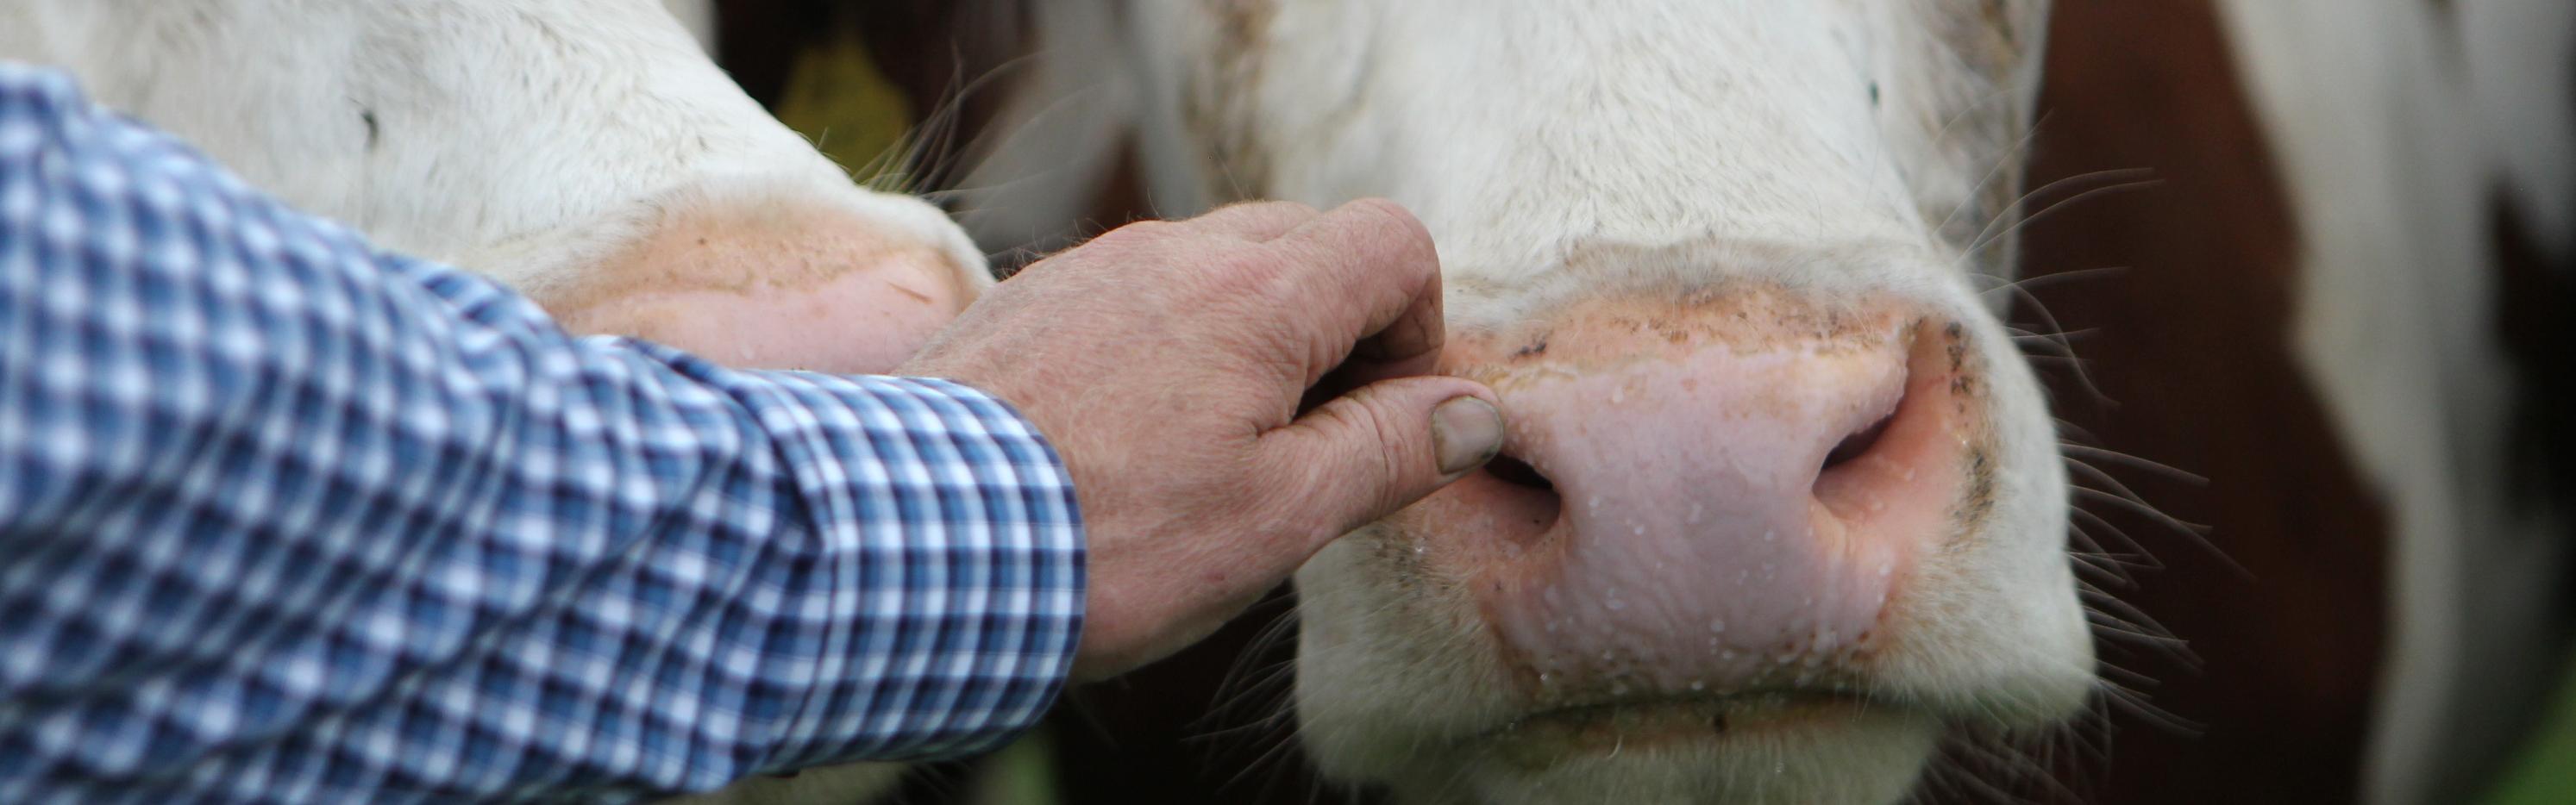 Mans hand patting cow carefully on the nose